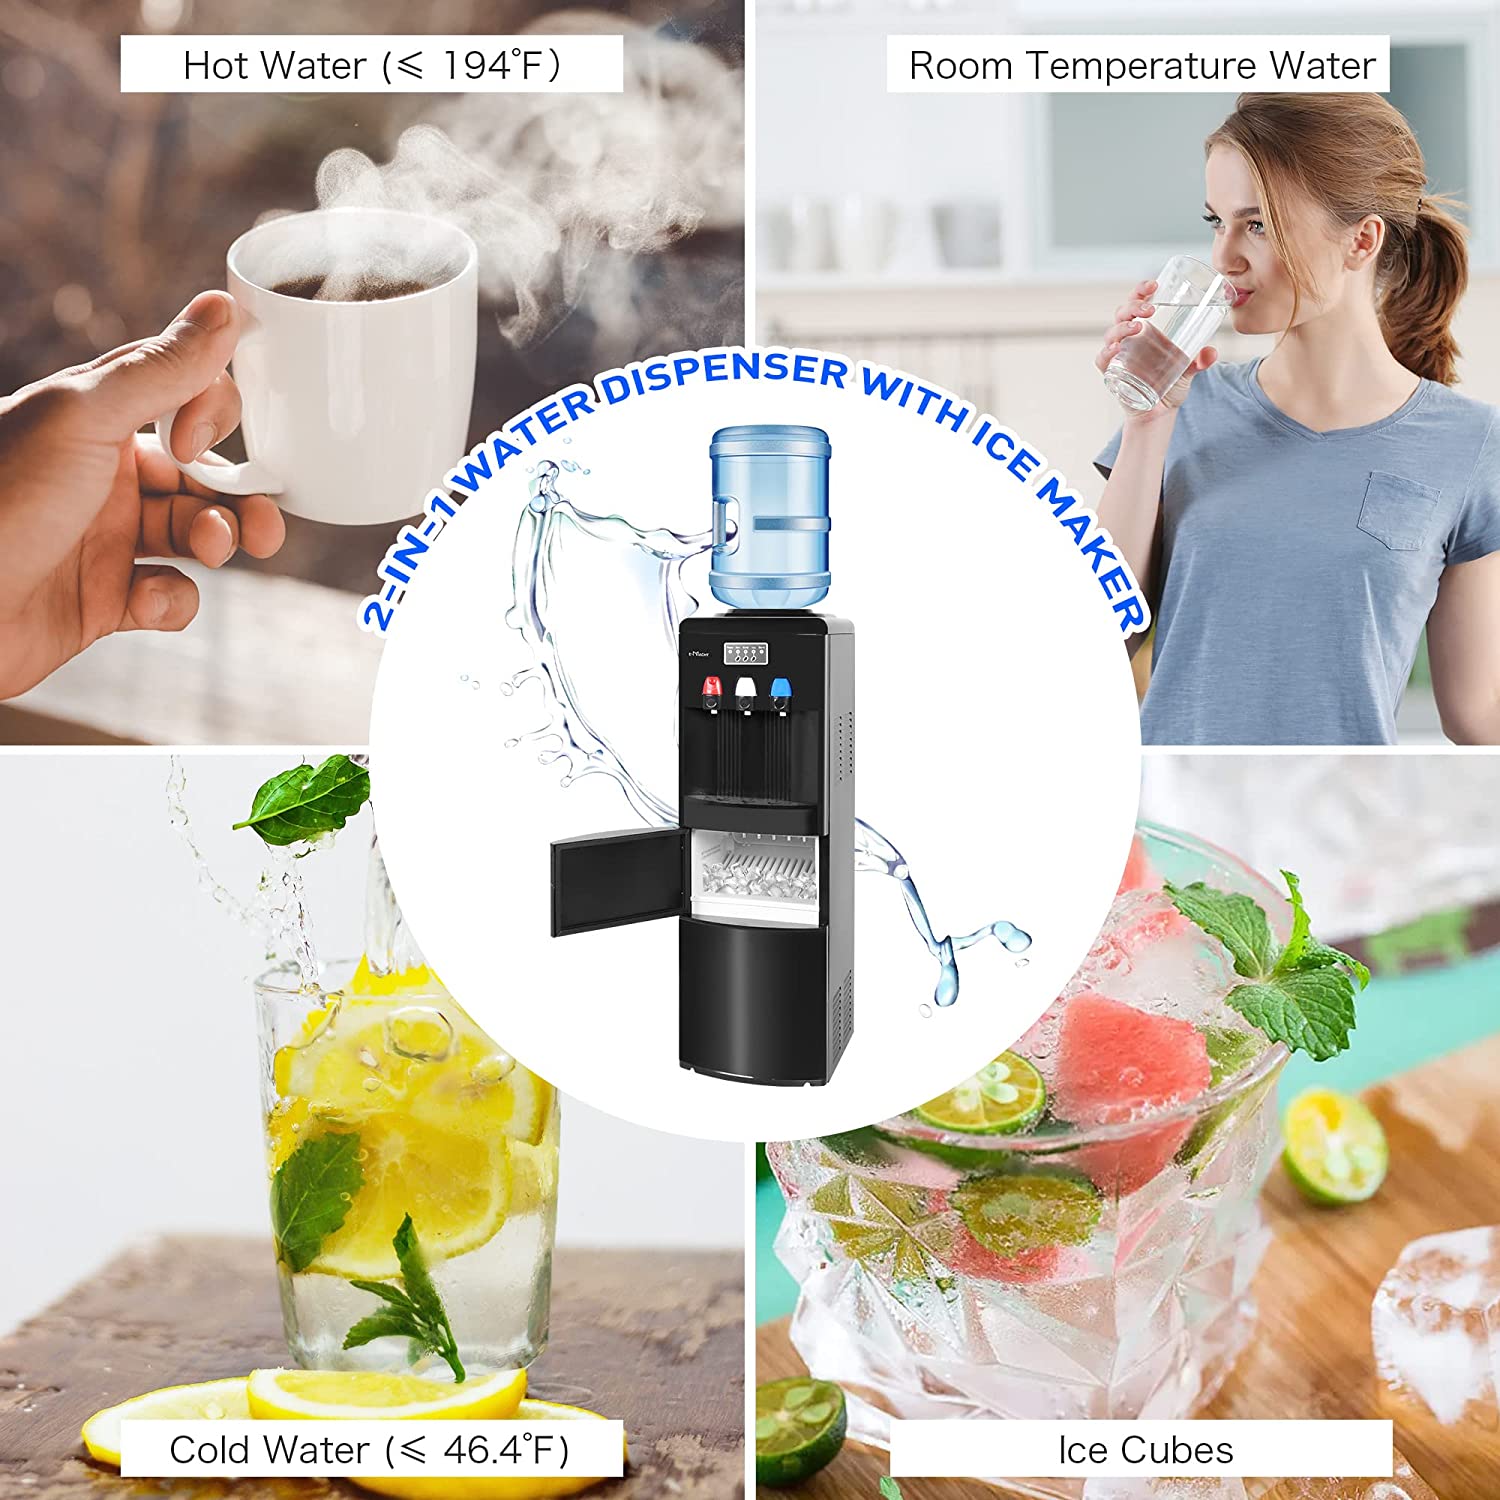 2-in-1 Water Cooler Dispenser with Ice Maker (3-5 Gallon), Scoop, and Child Safety Lock, Black